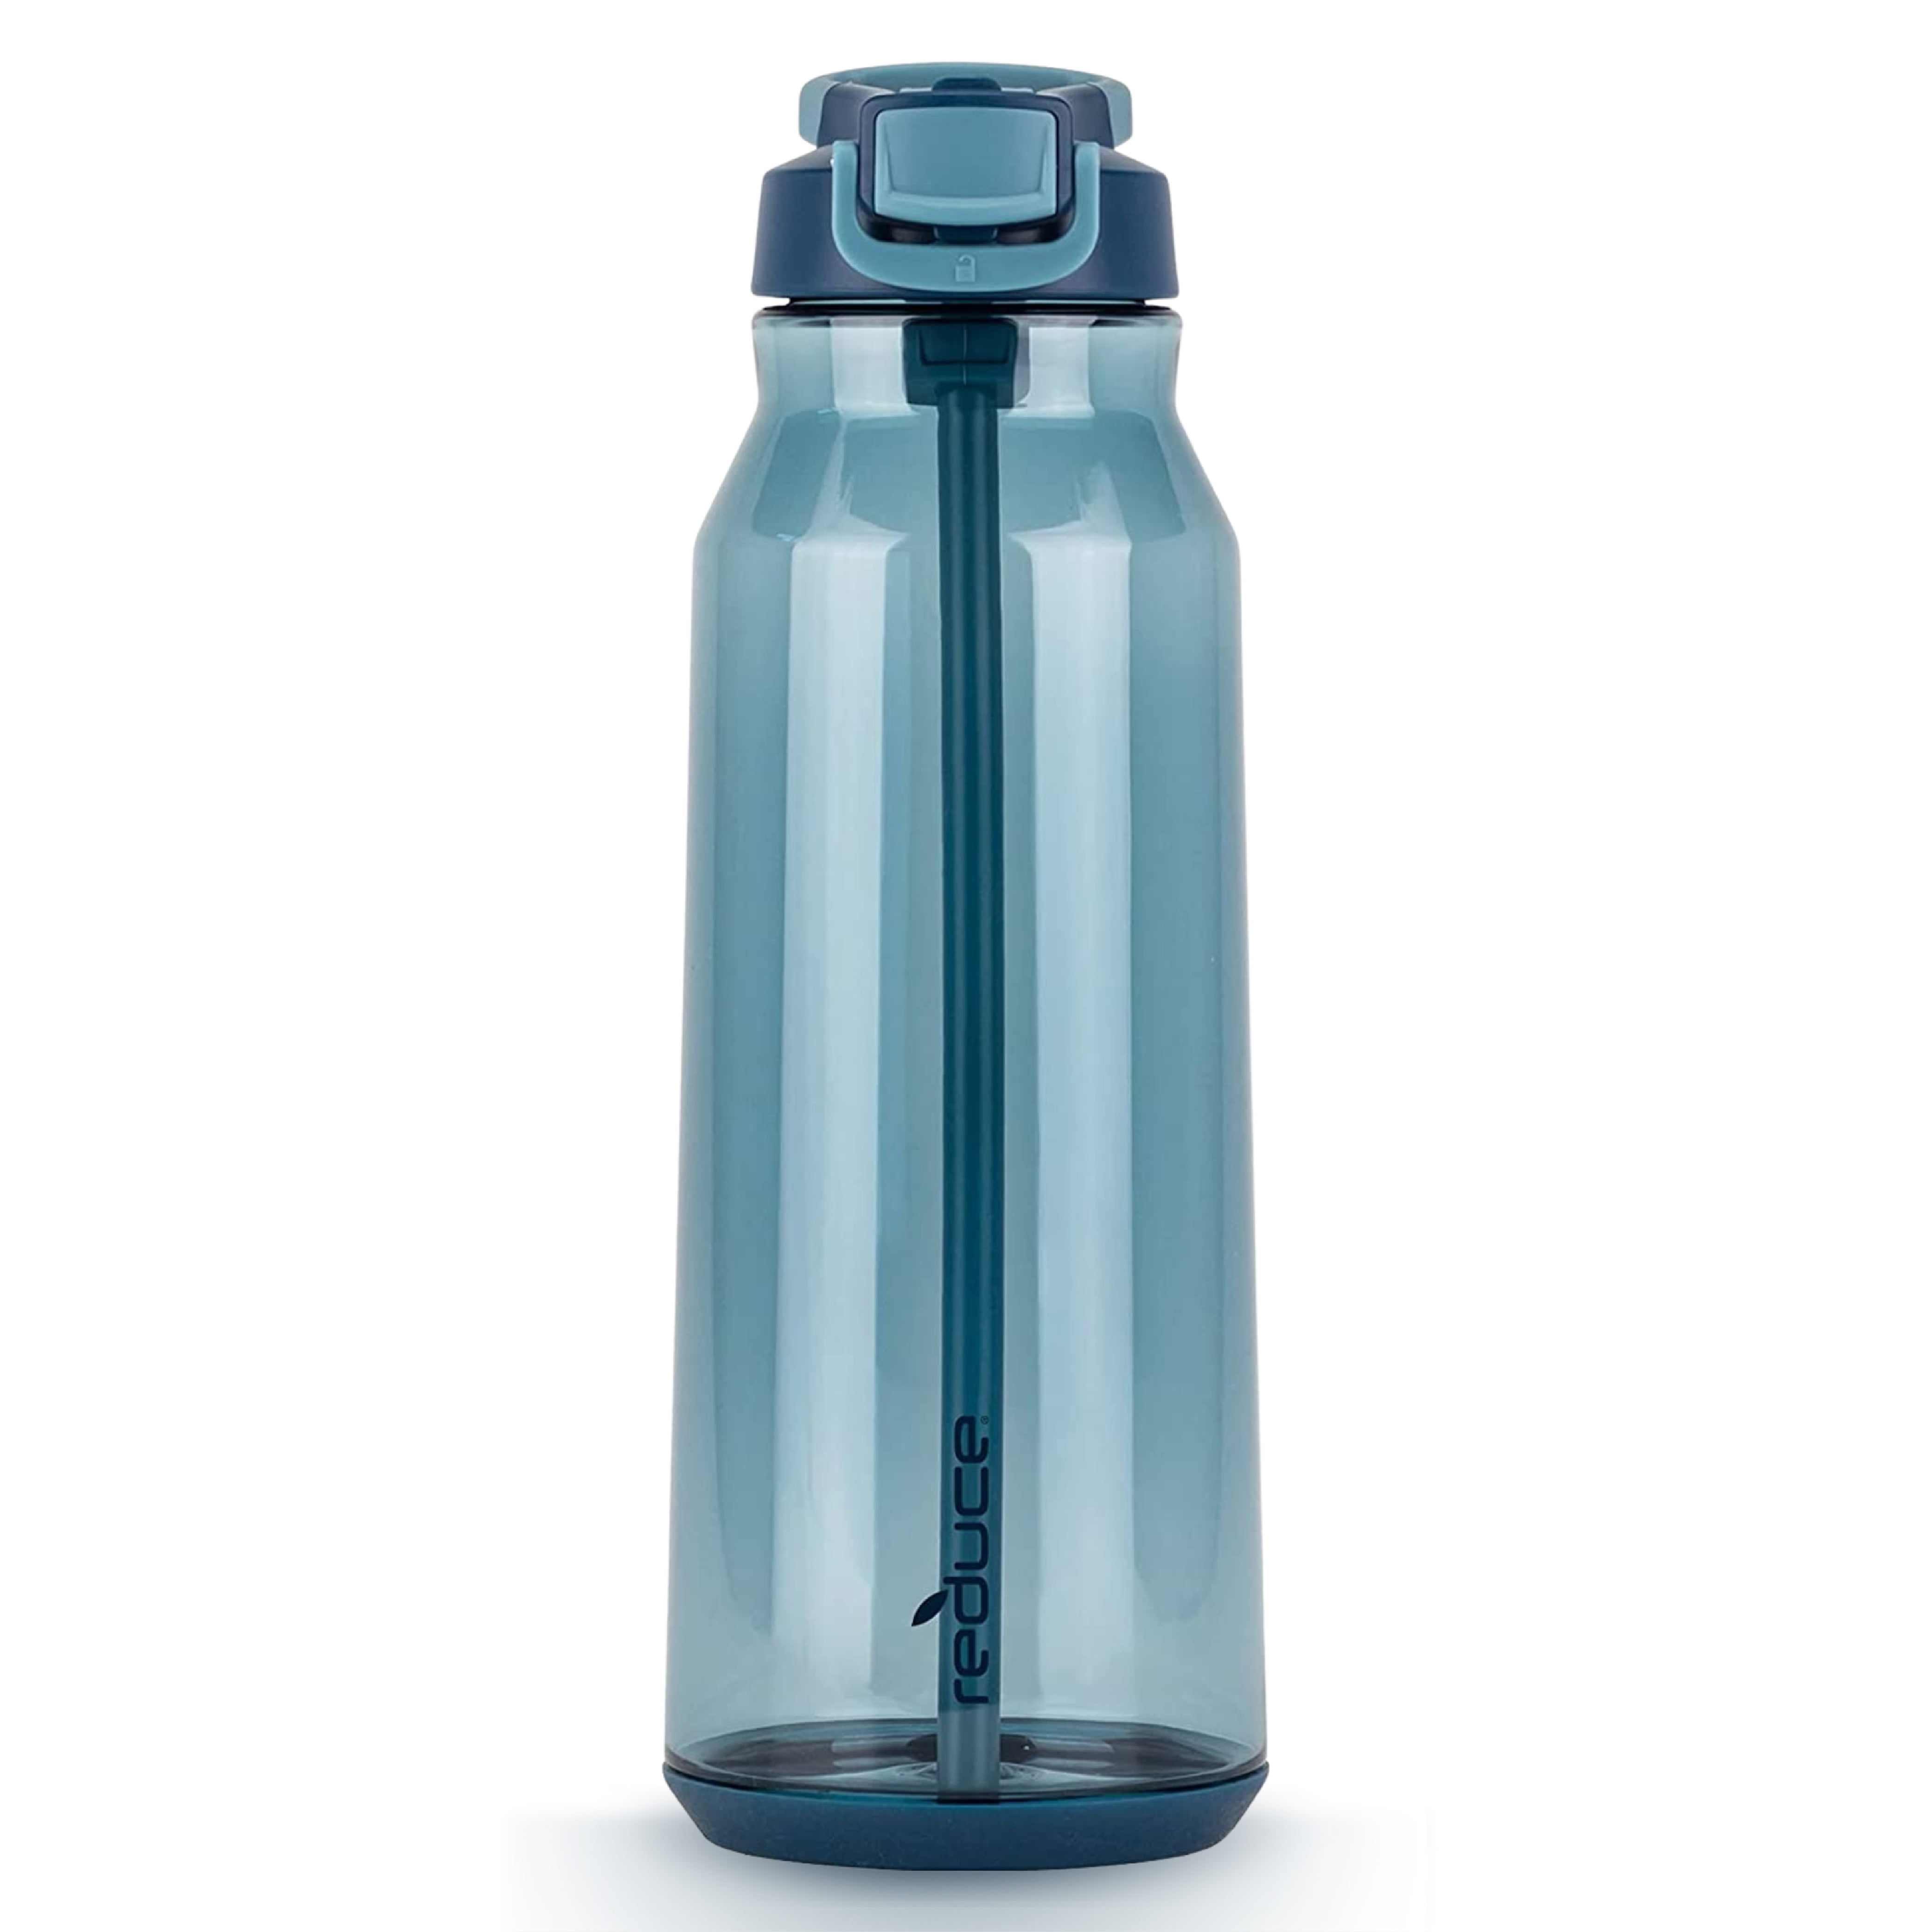 Never Grow Up Reusable Glass Water Bottle by Faucet Face 14.4 oz.